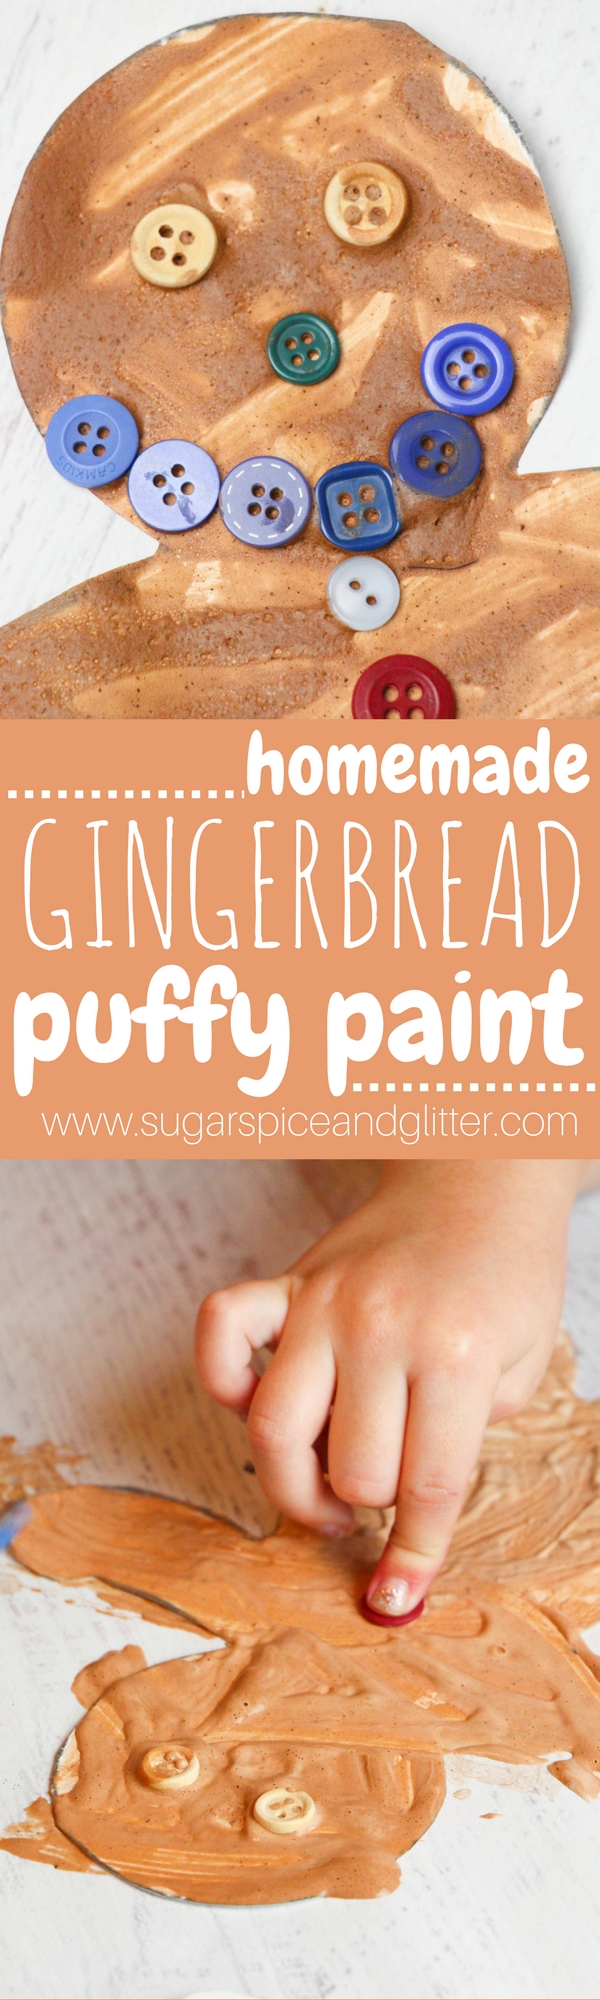 Gingerbread Puffy Paint - a deliciously scented homemade puffy paint for kids. Turn art into a multi-sensory experience - color, texture and scent. Use this paint to make beautiful holiday art, cards, puffy gingerbread houses and more!